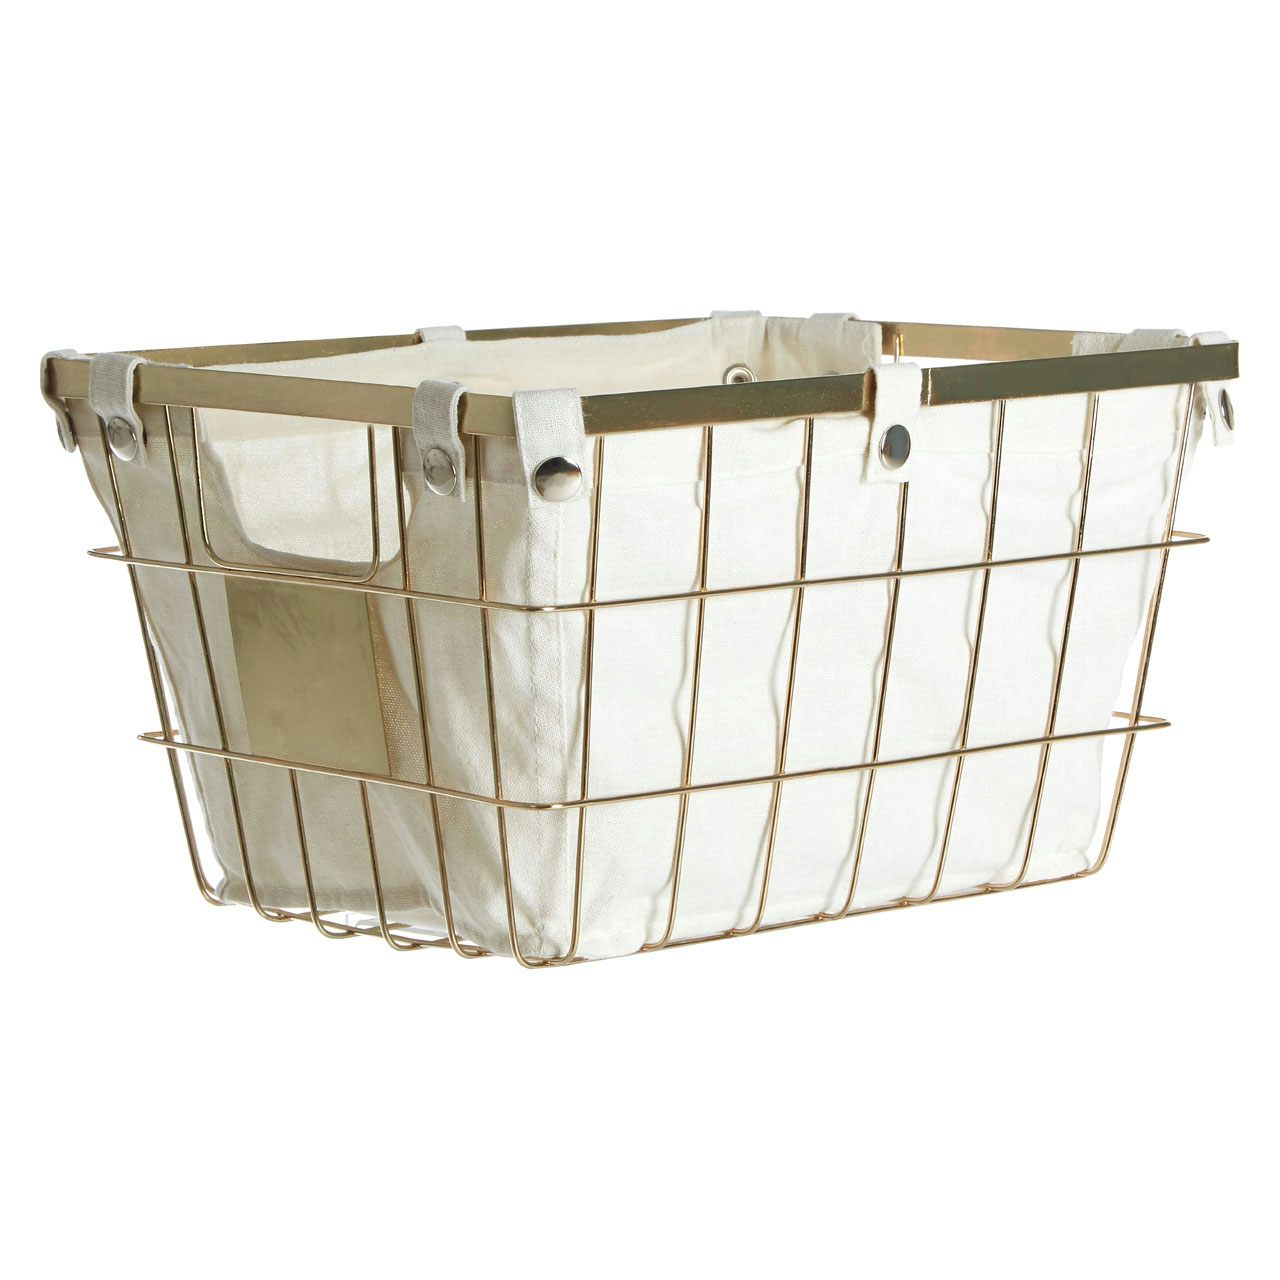 Accents Gold finish large storage basket with cotton liner